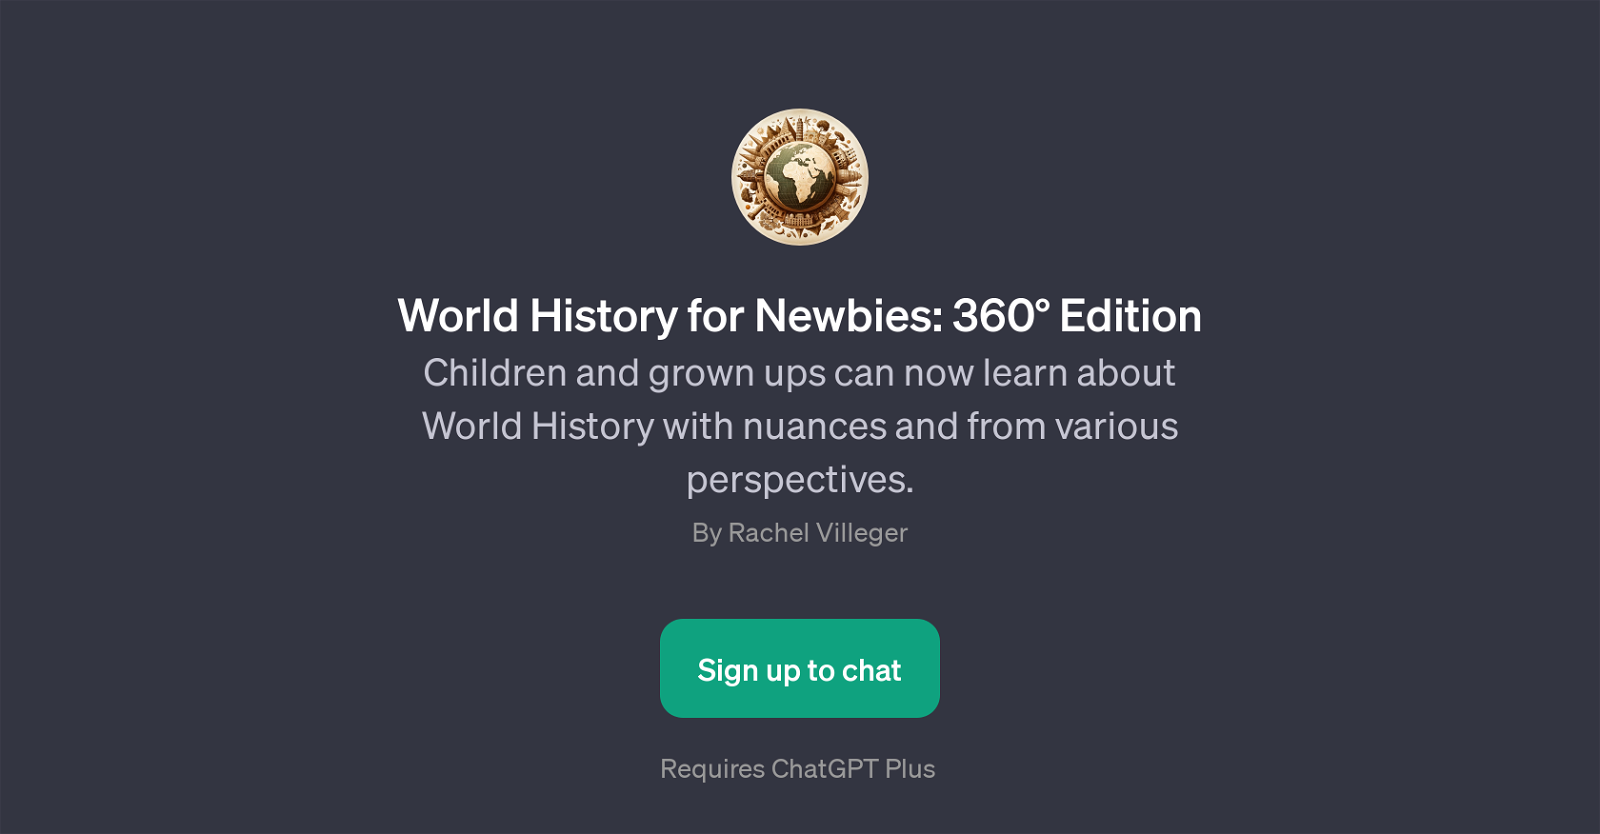 World History for Newbies: 360 Edition website